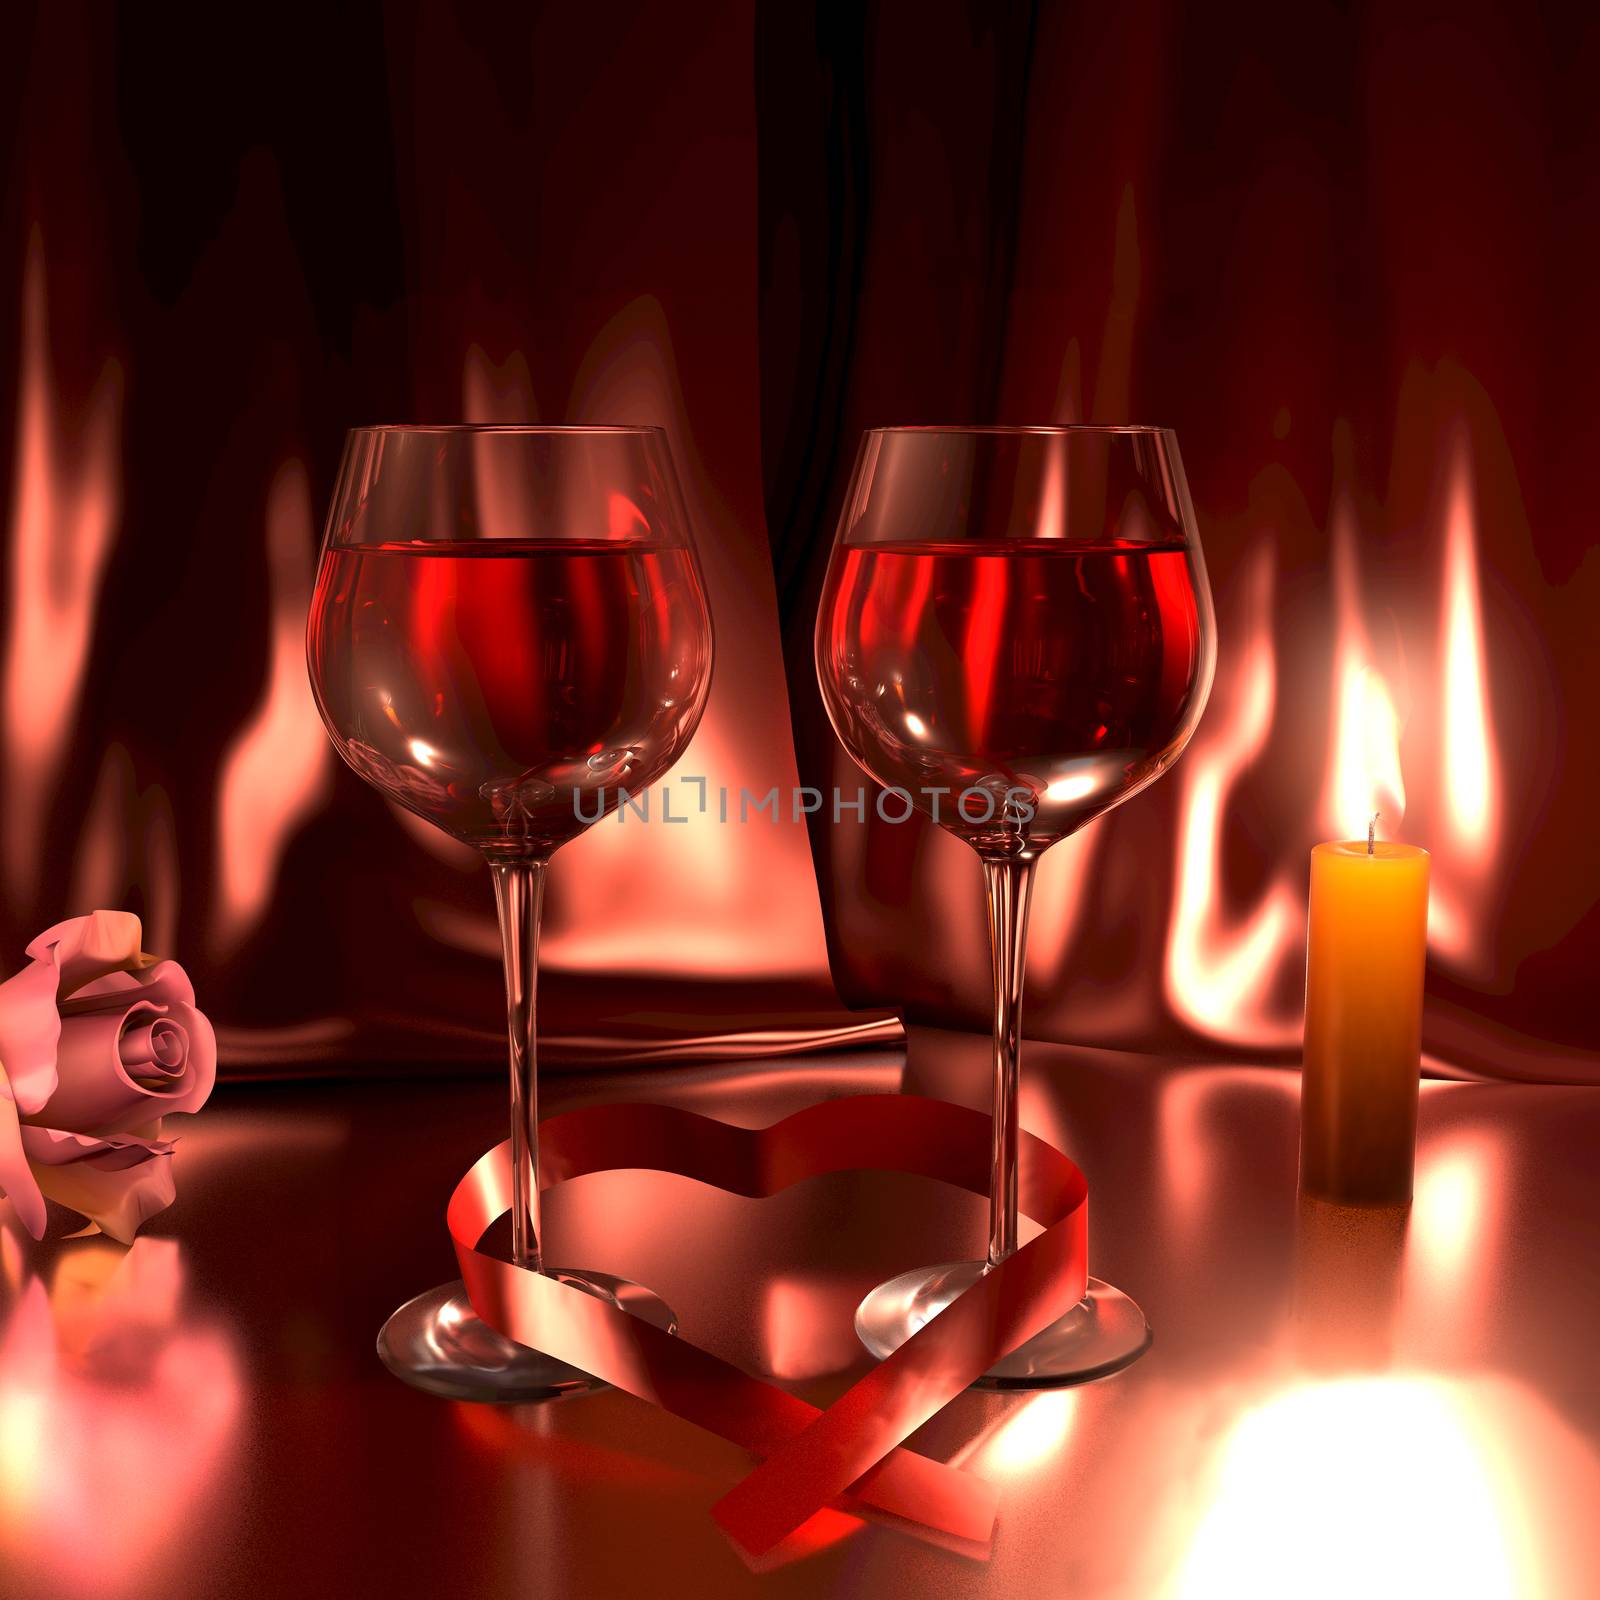 Romantic scene with two glasses of good red wine, a rose, and a lit candle. This illustration symbolizes love.